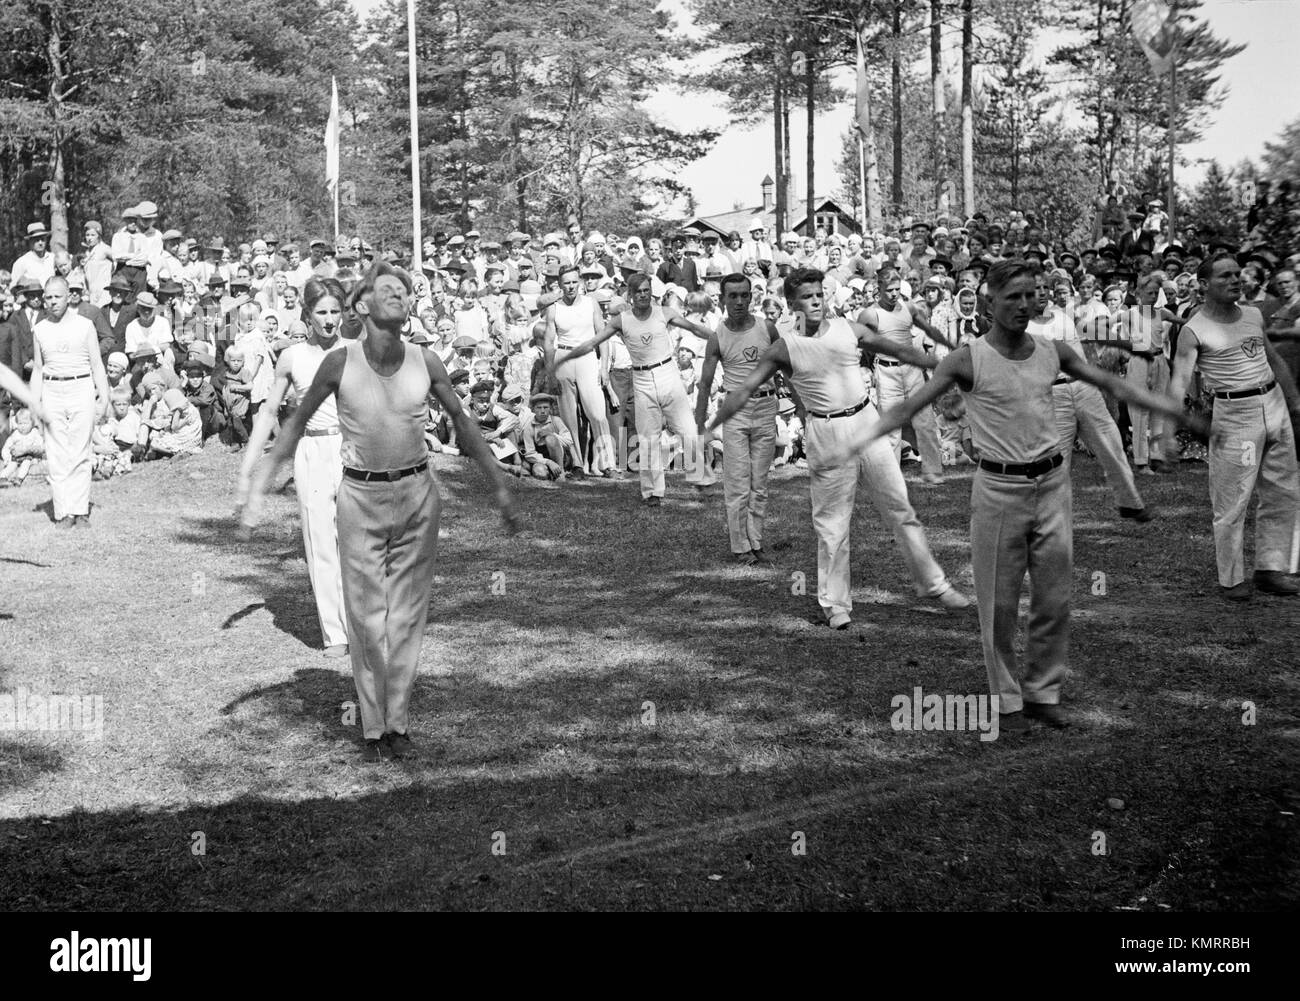 Male gymnasts perform outside, Gymnastics show in the 25th anniversary celebrations of Janakkala Cooperative Store, Finland,  1933 Stock Photo